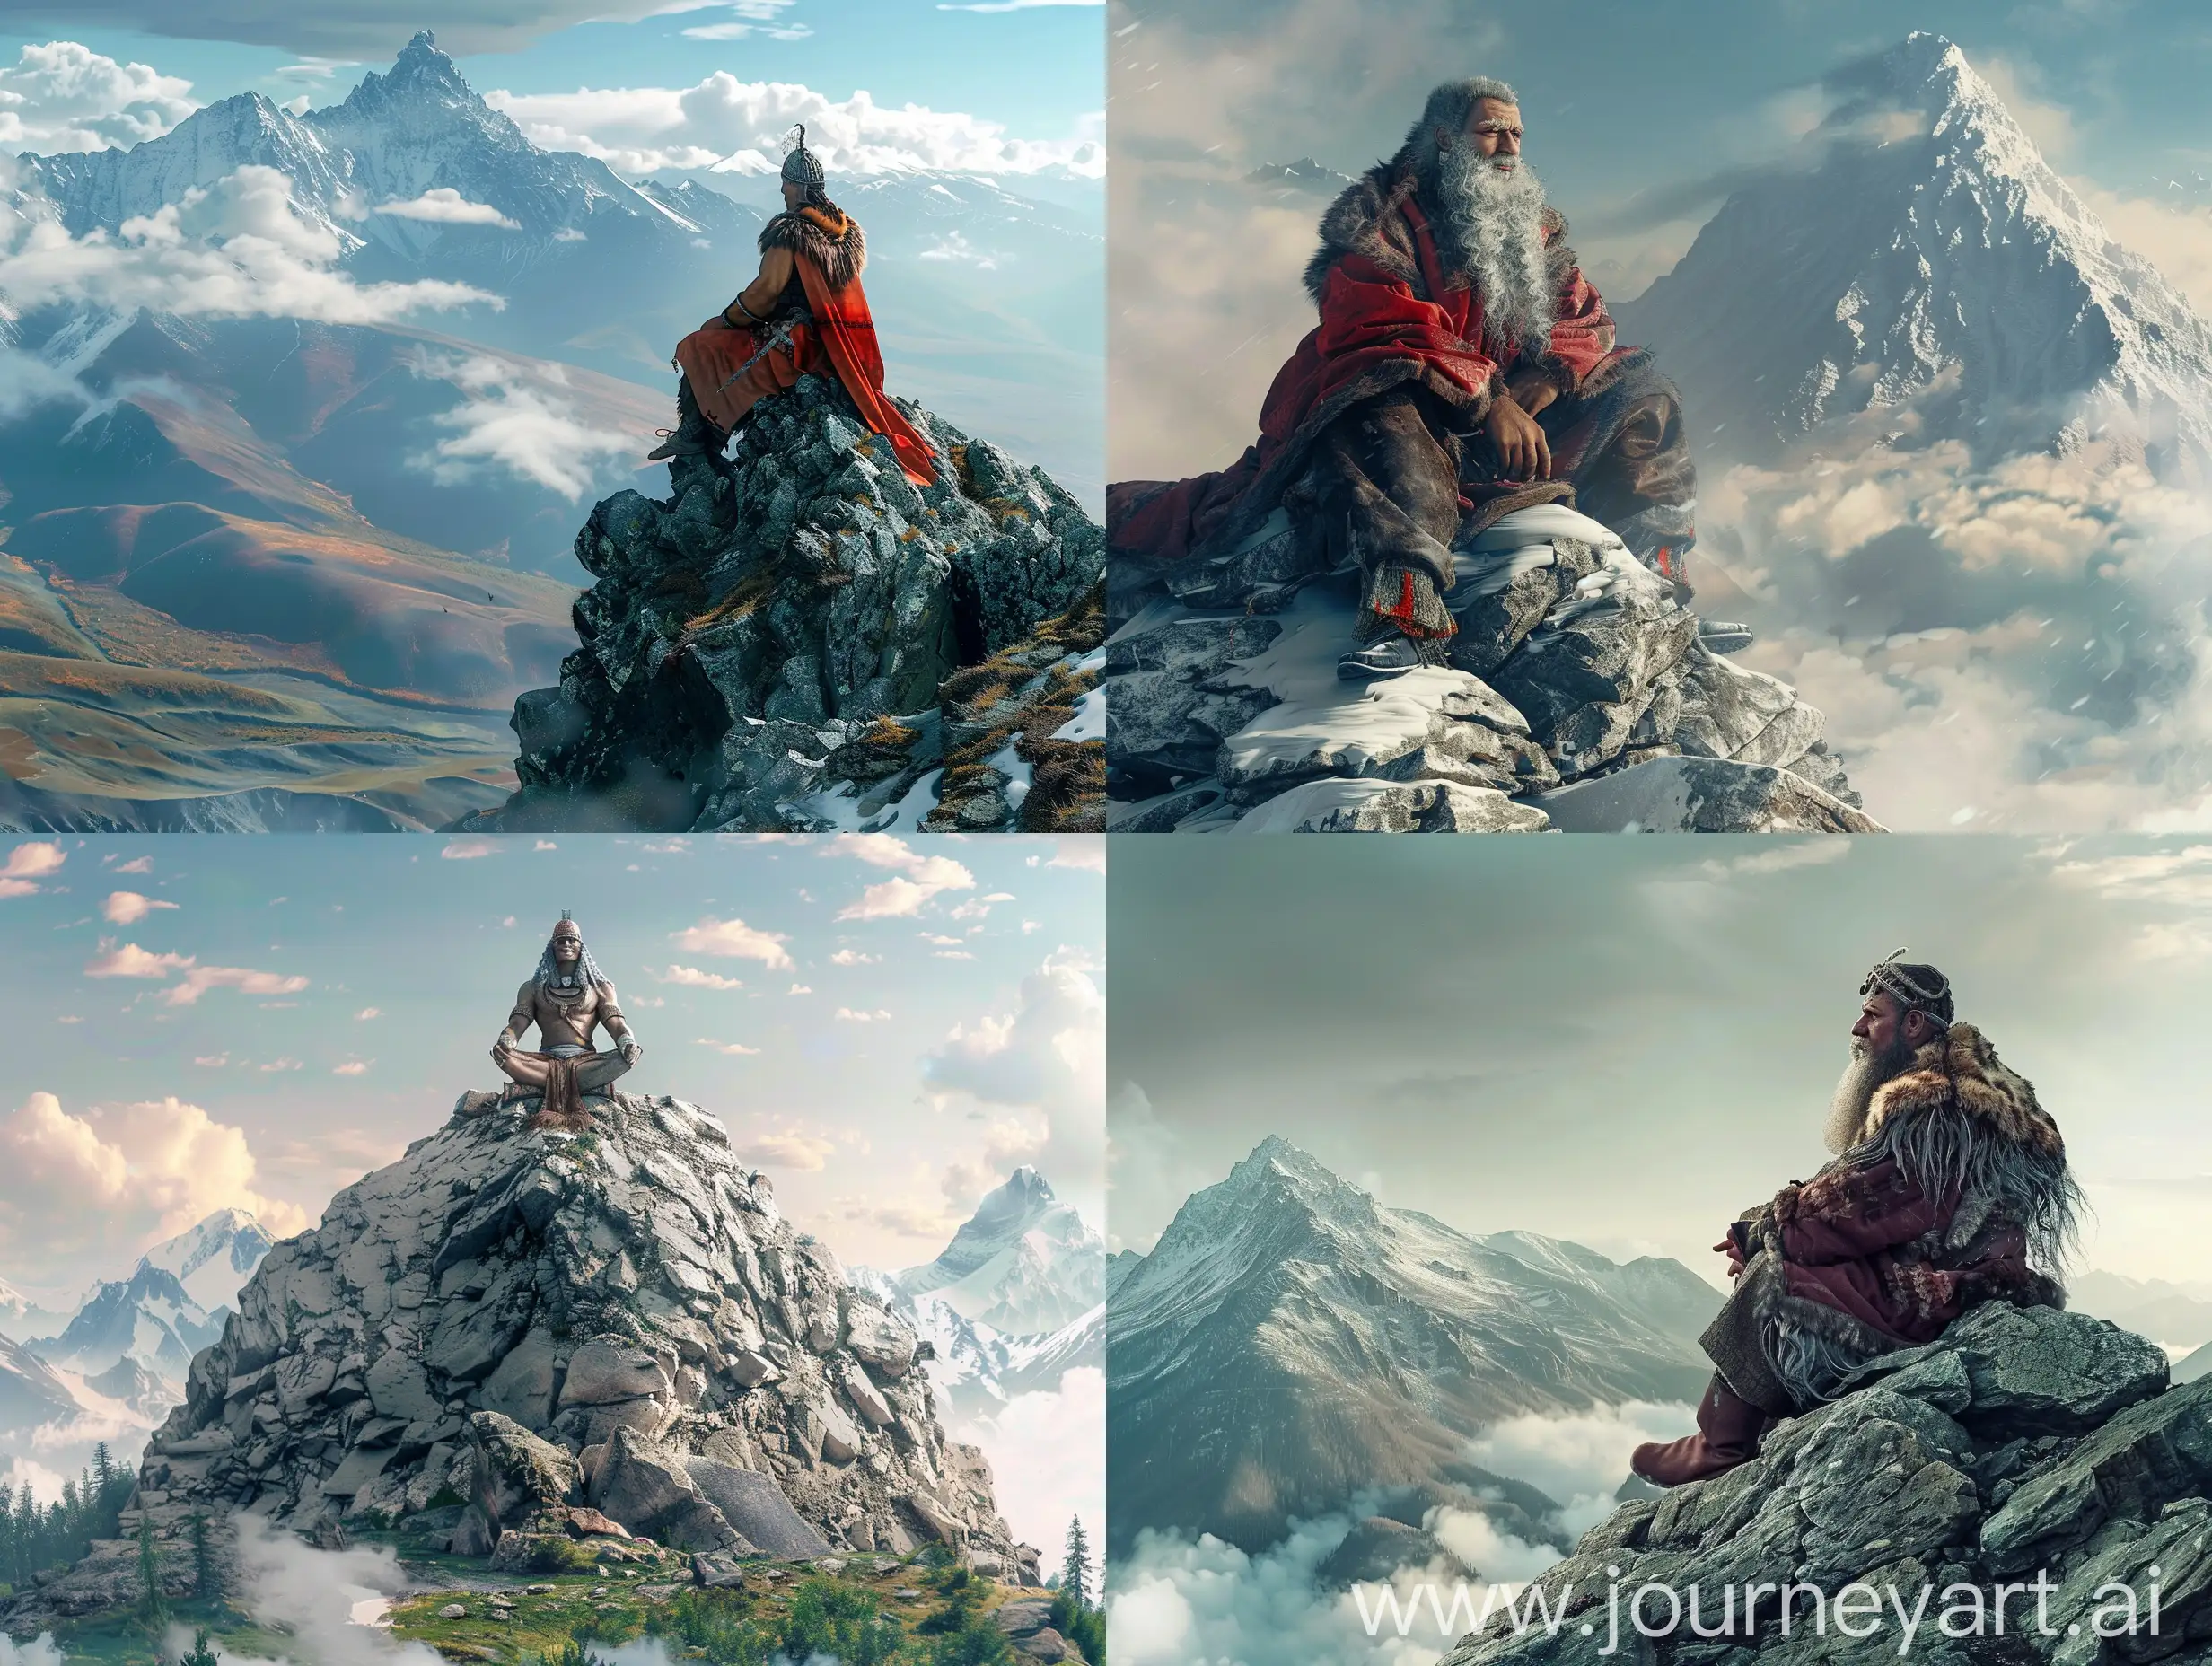 AdamKhan-Mighty-God-of-Altai-Overlooking-His-World-from-Atop-a-Mountain